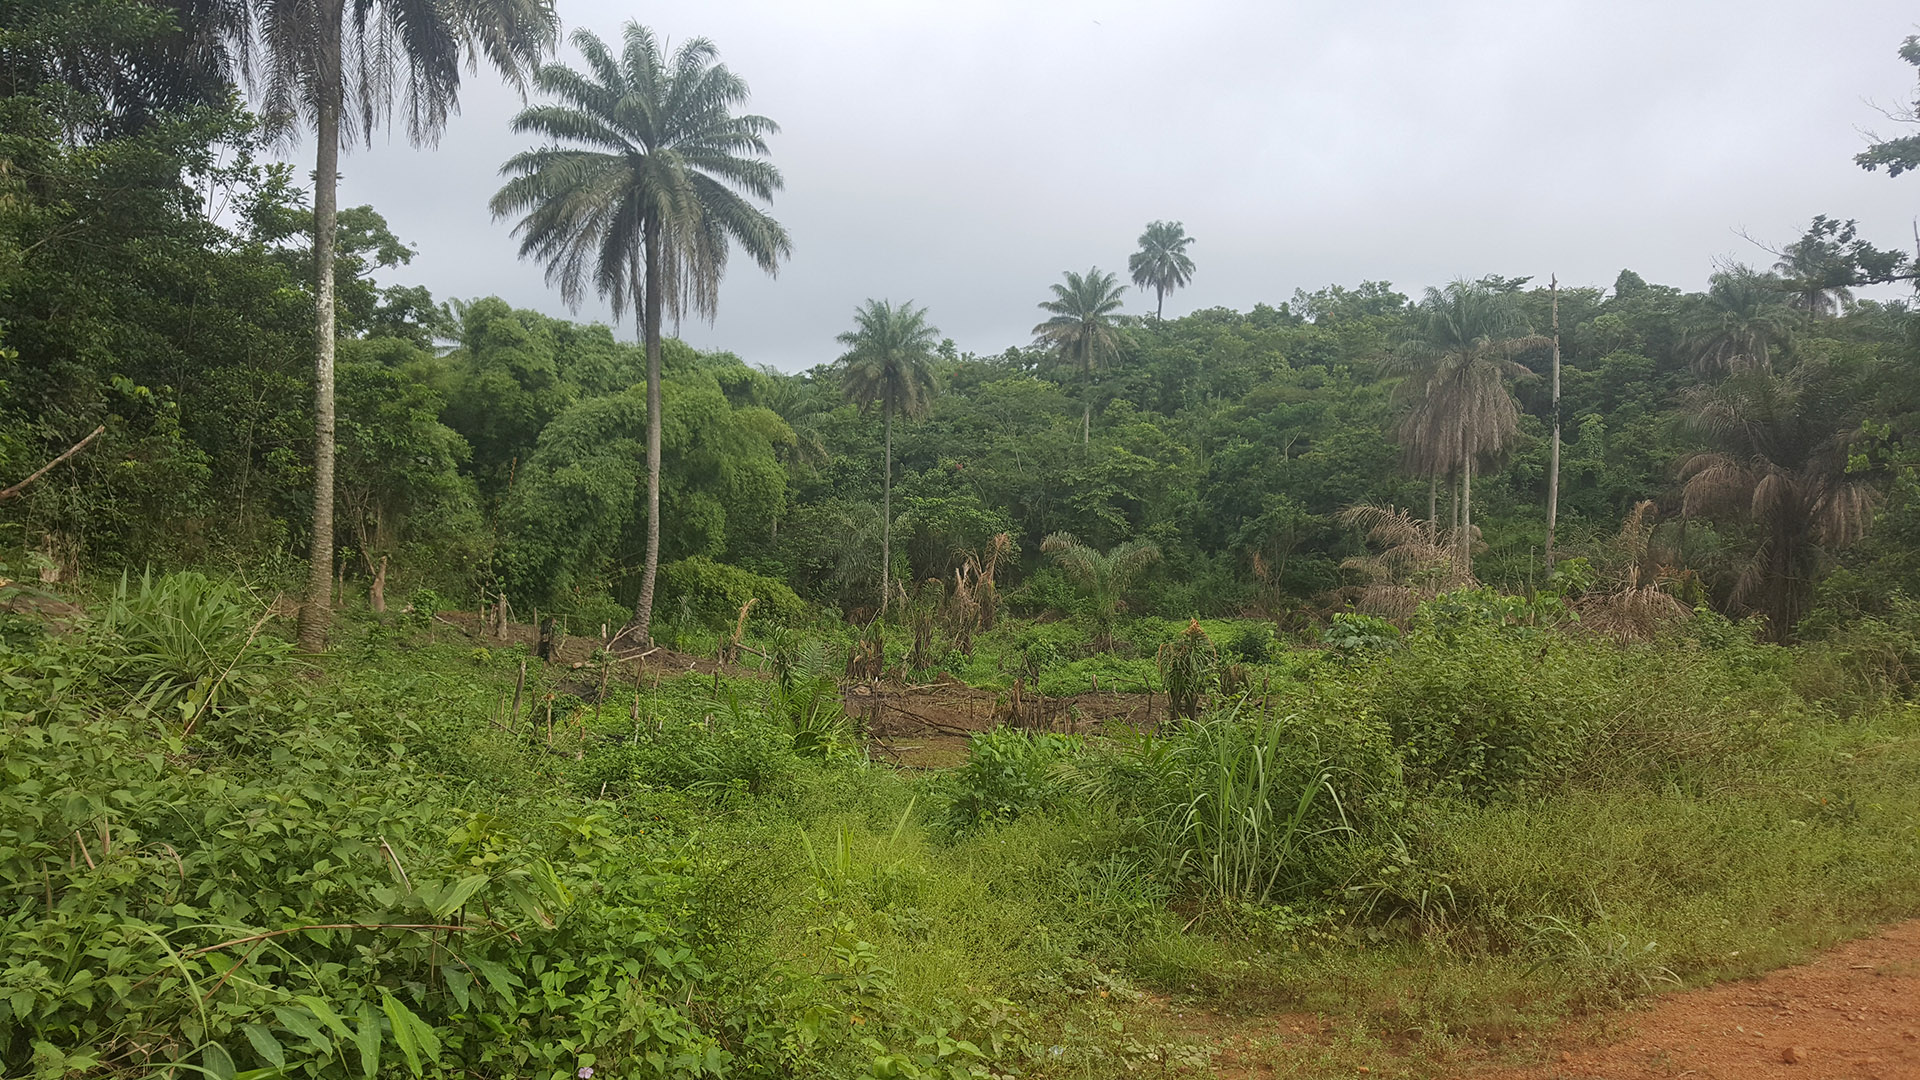 REDD+: A Catalyst for Land Use Planning in Liberia